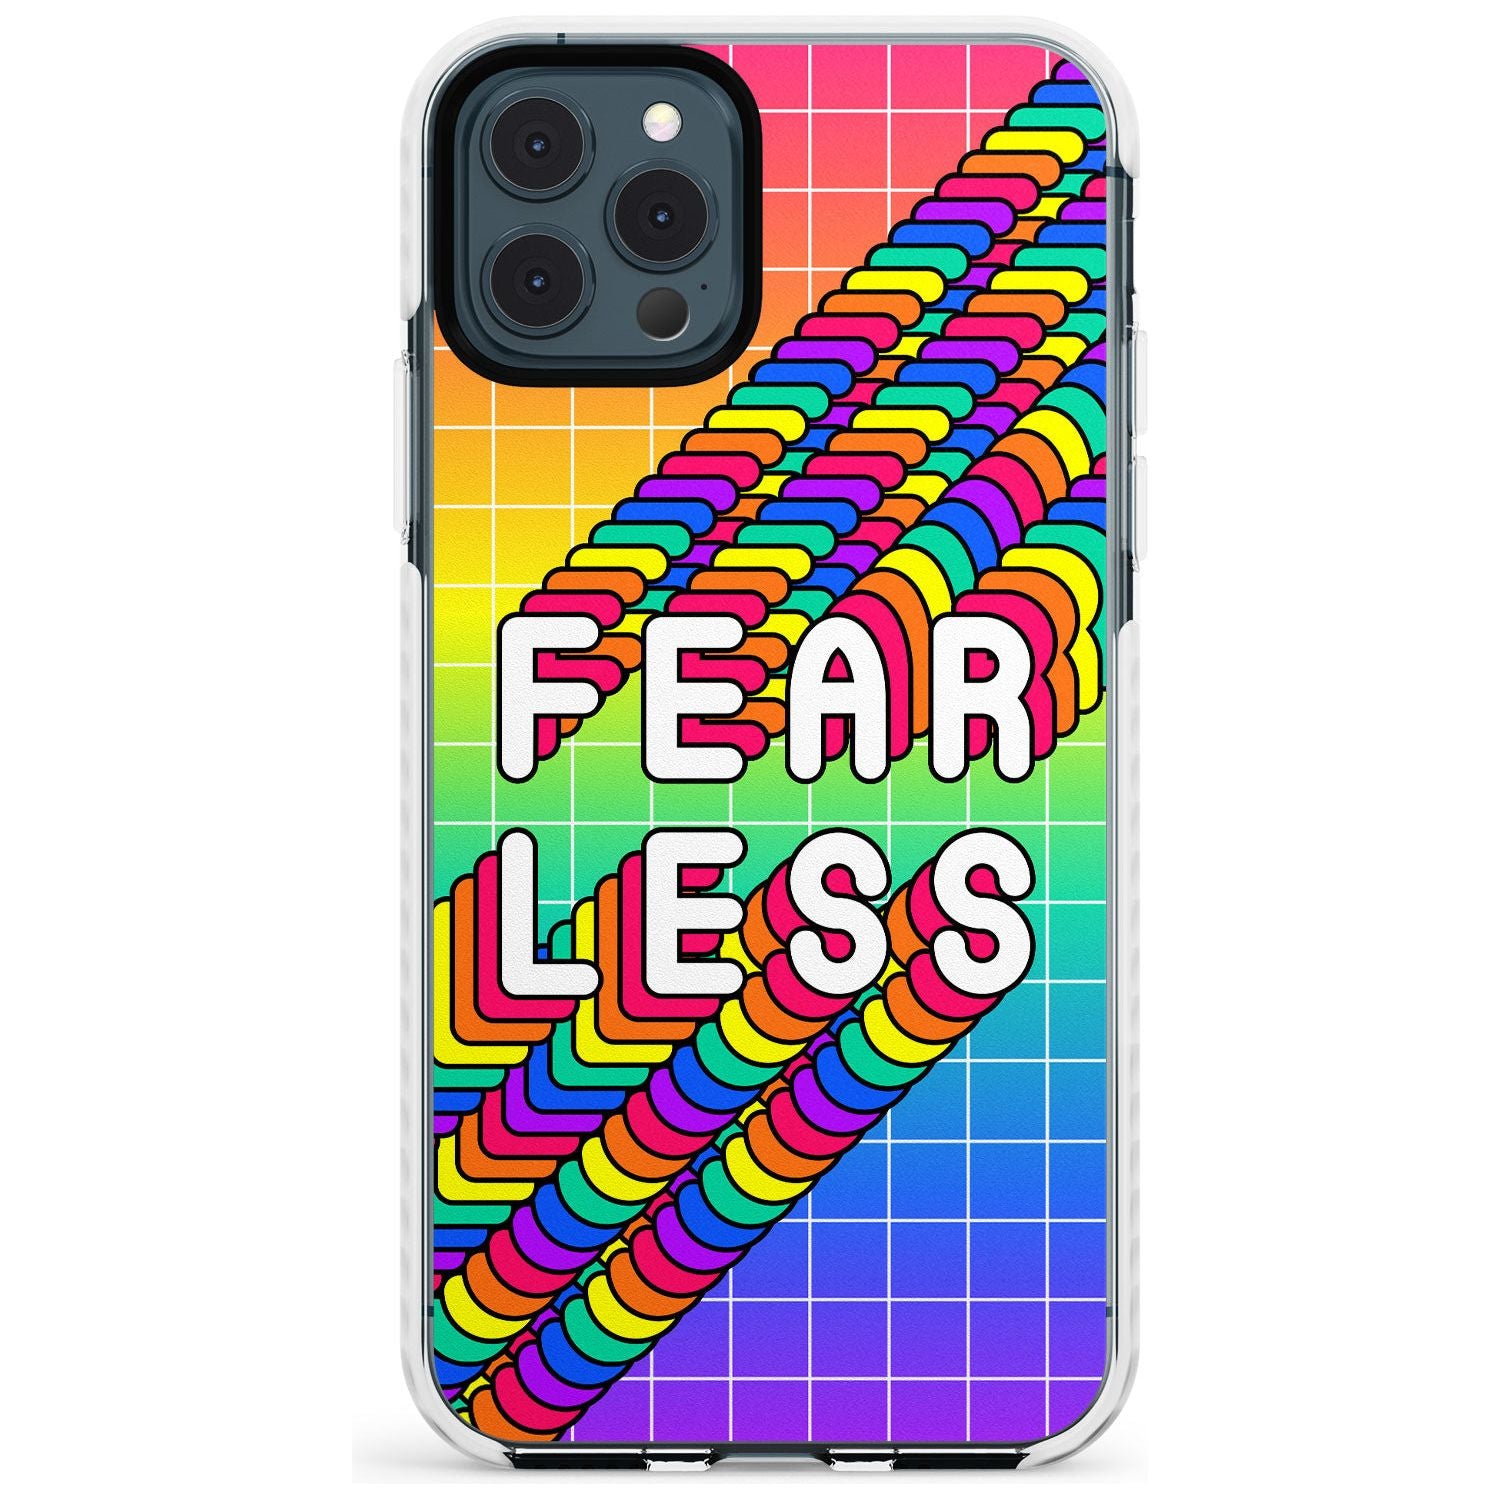 Fearless Impact Phone Case for iPhone 11 Pro Max